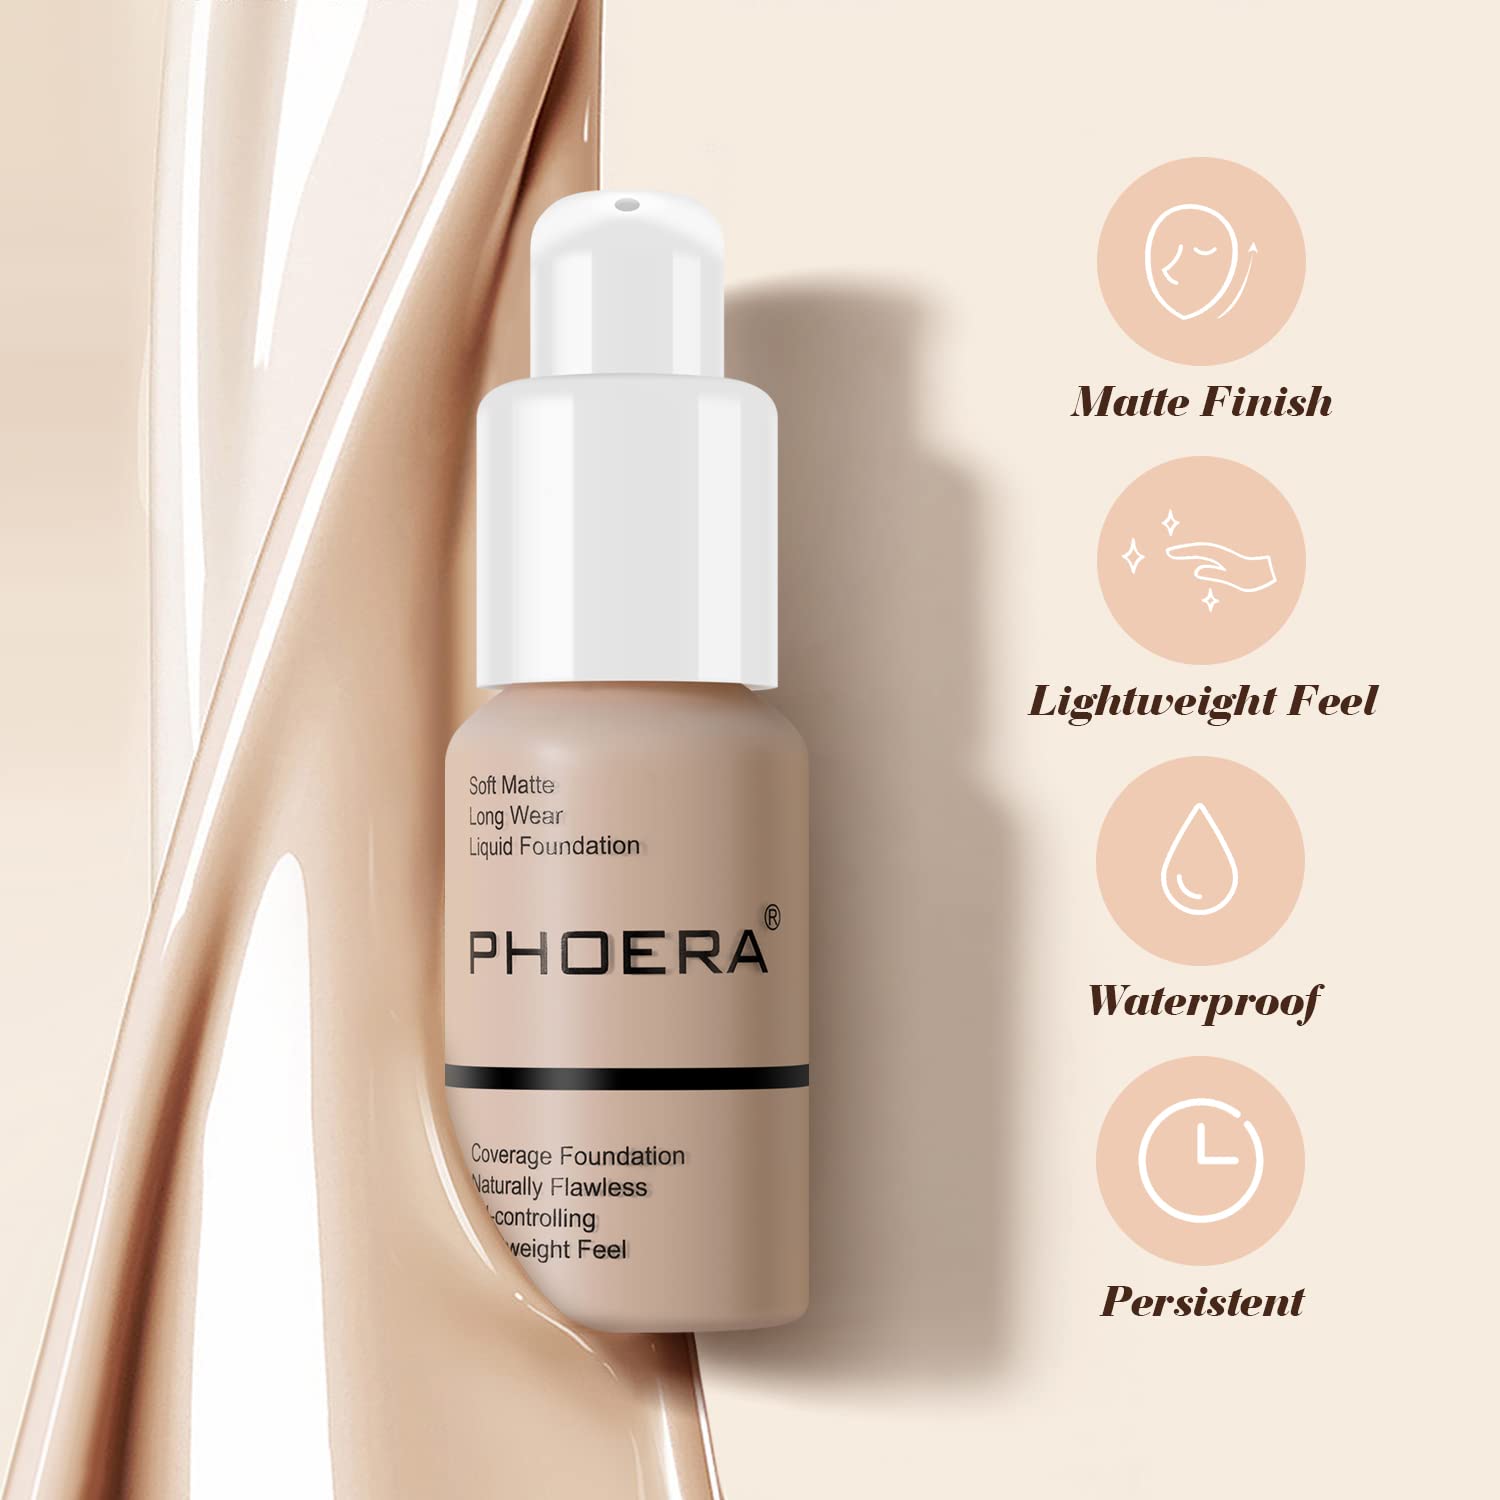 BestLand 2Pack PHOERA Foundation Full Coverage Liquid Foundation Cream - Long-lasting Lightweight Concealer - Oil-Free Formula - Natural Shade - Suitable for All Skin Types (104 Buff Beige & 105 Sand)